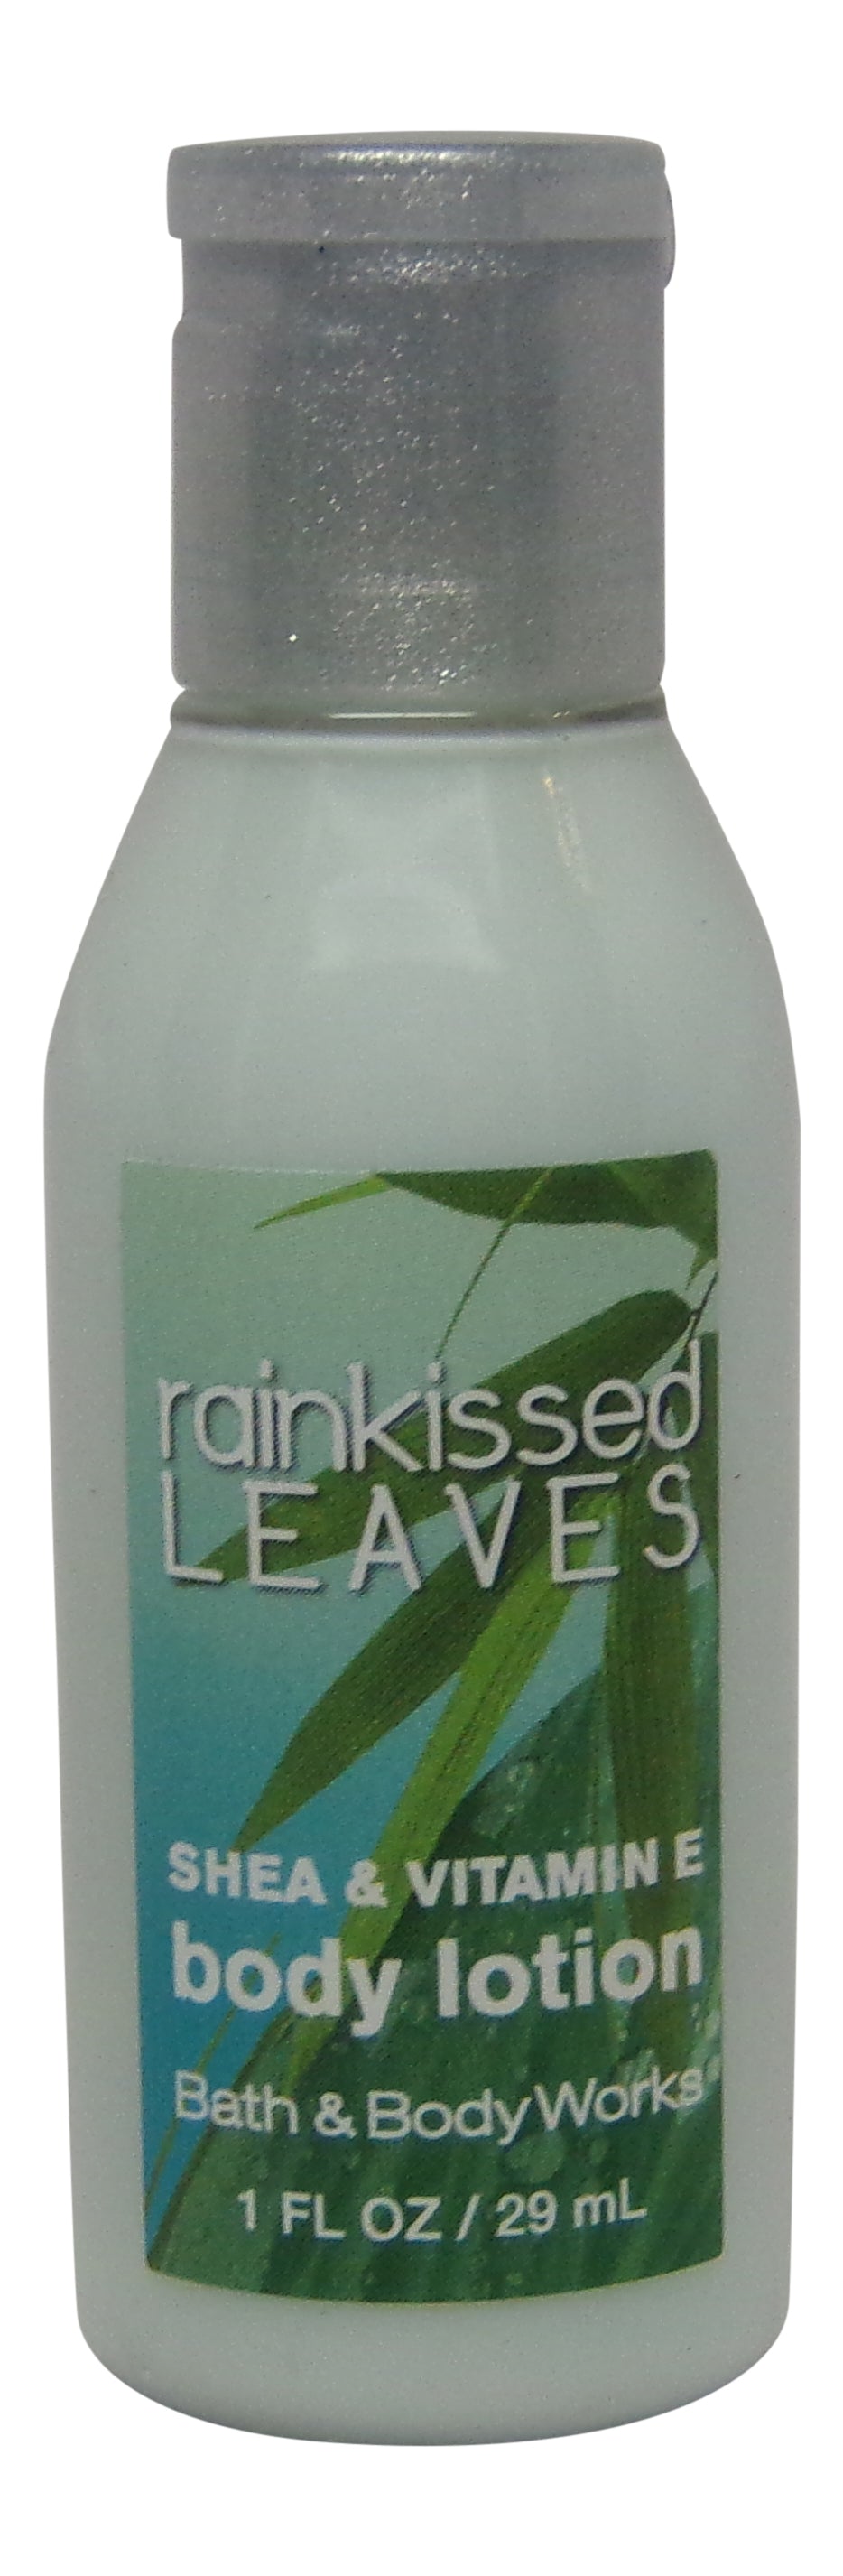 Bath & Body Works Rainkissed Leaves Lotion lot of 30 bottles Total of 30oz